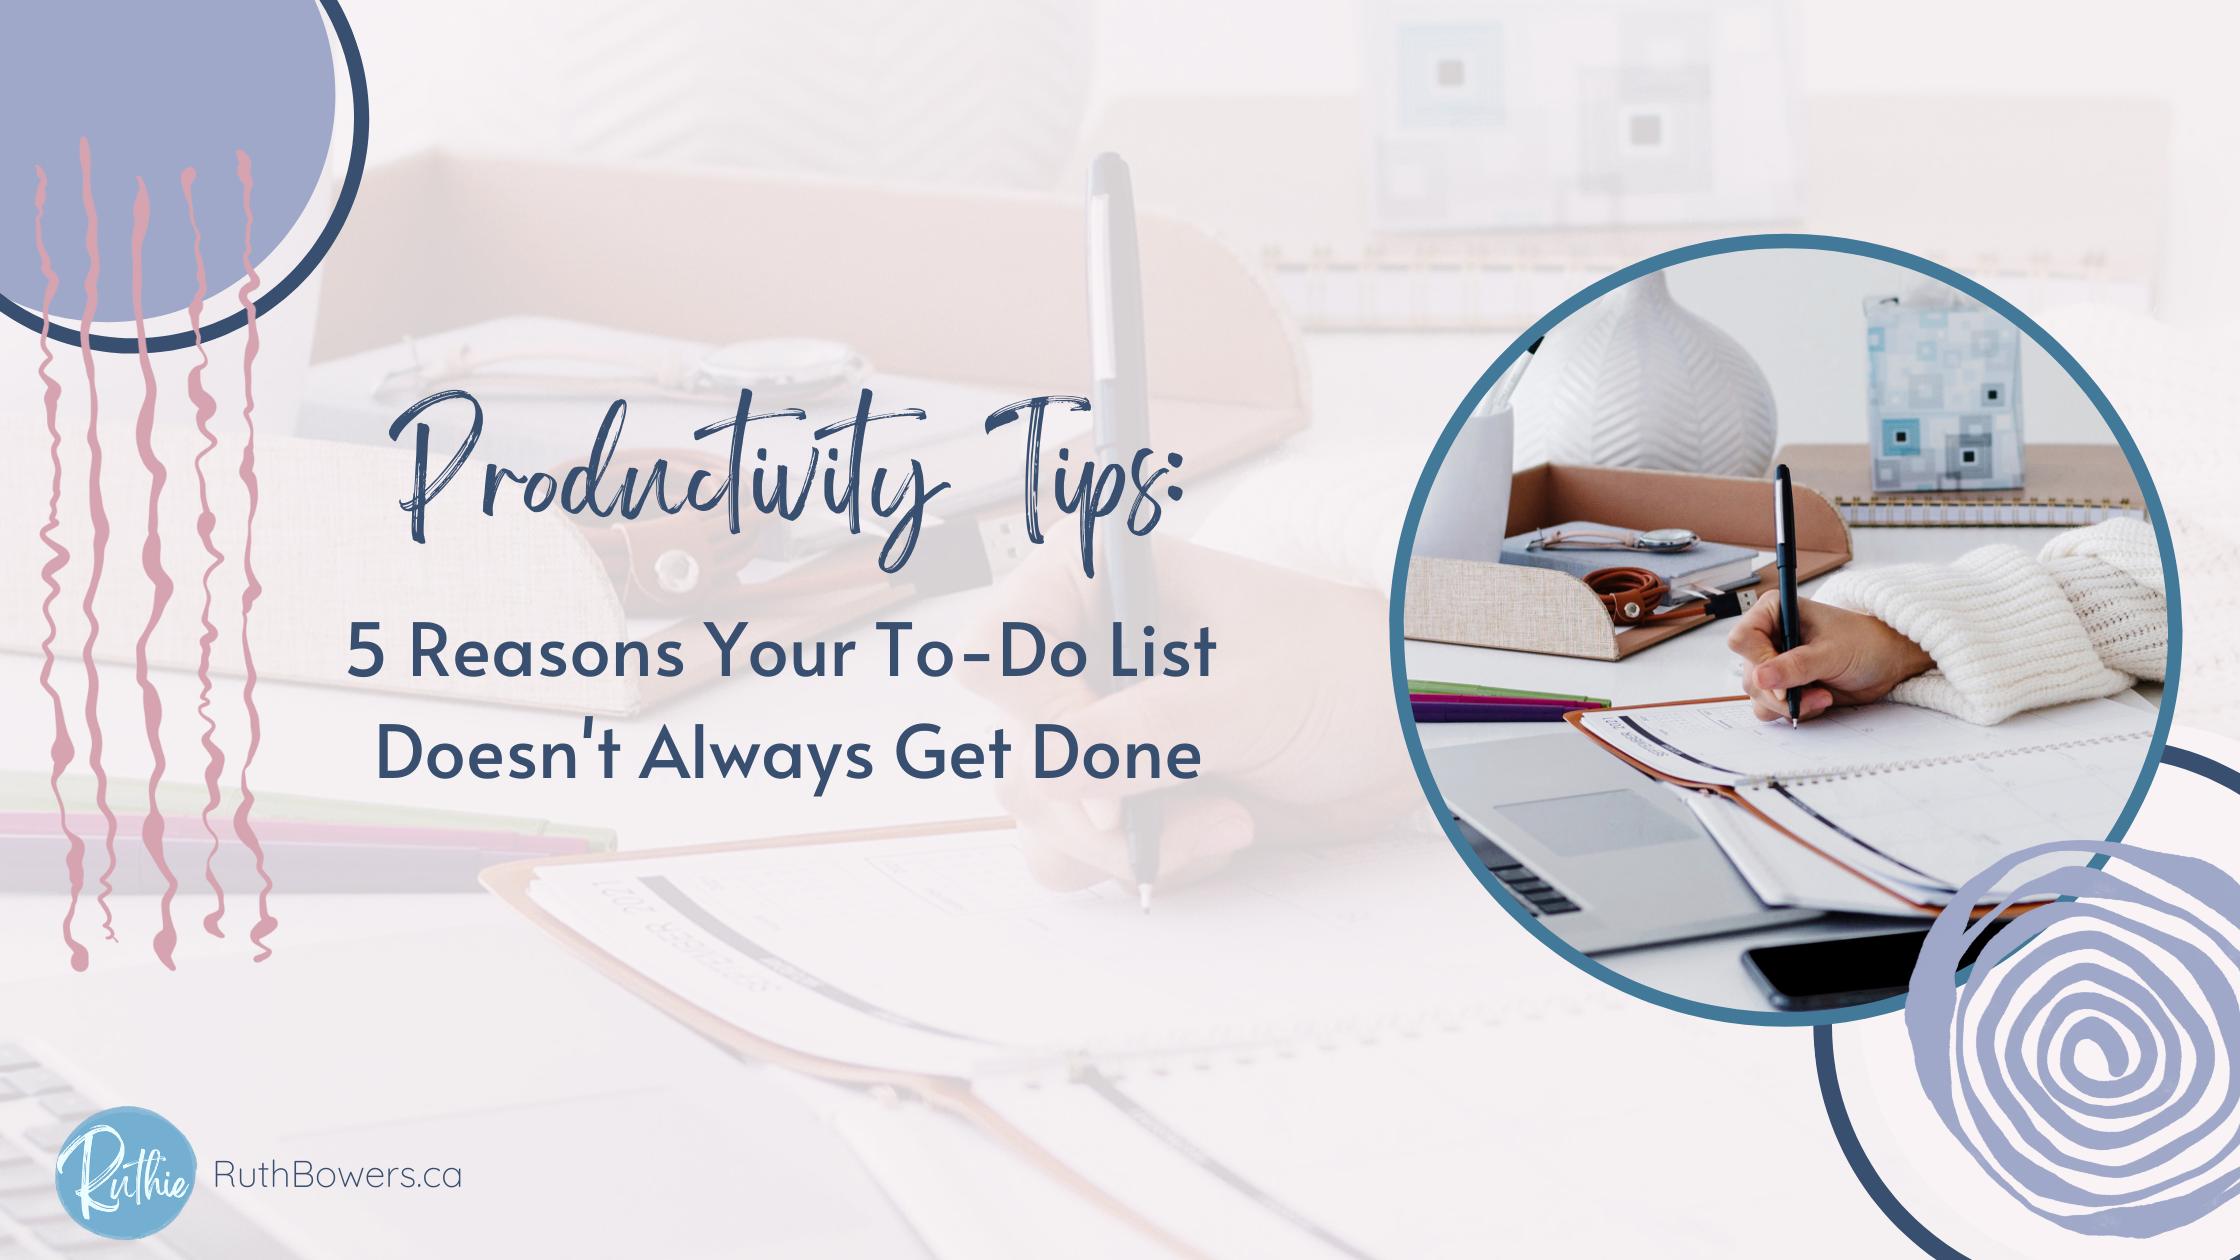 5 reasons to-do list not done